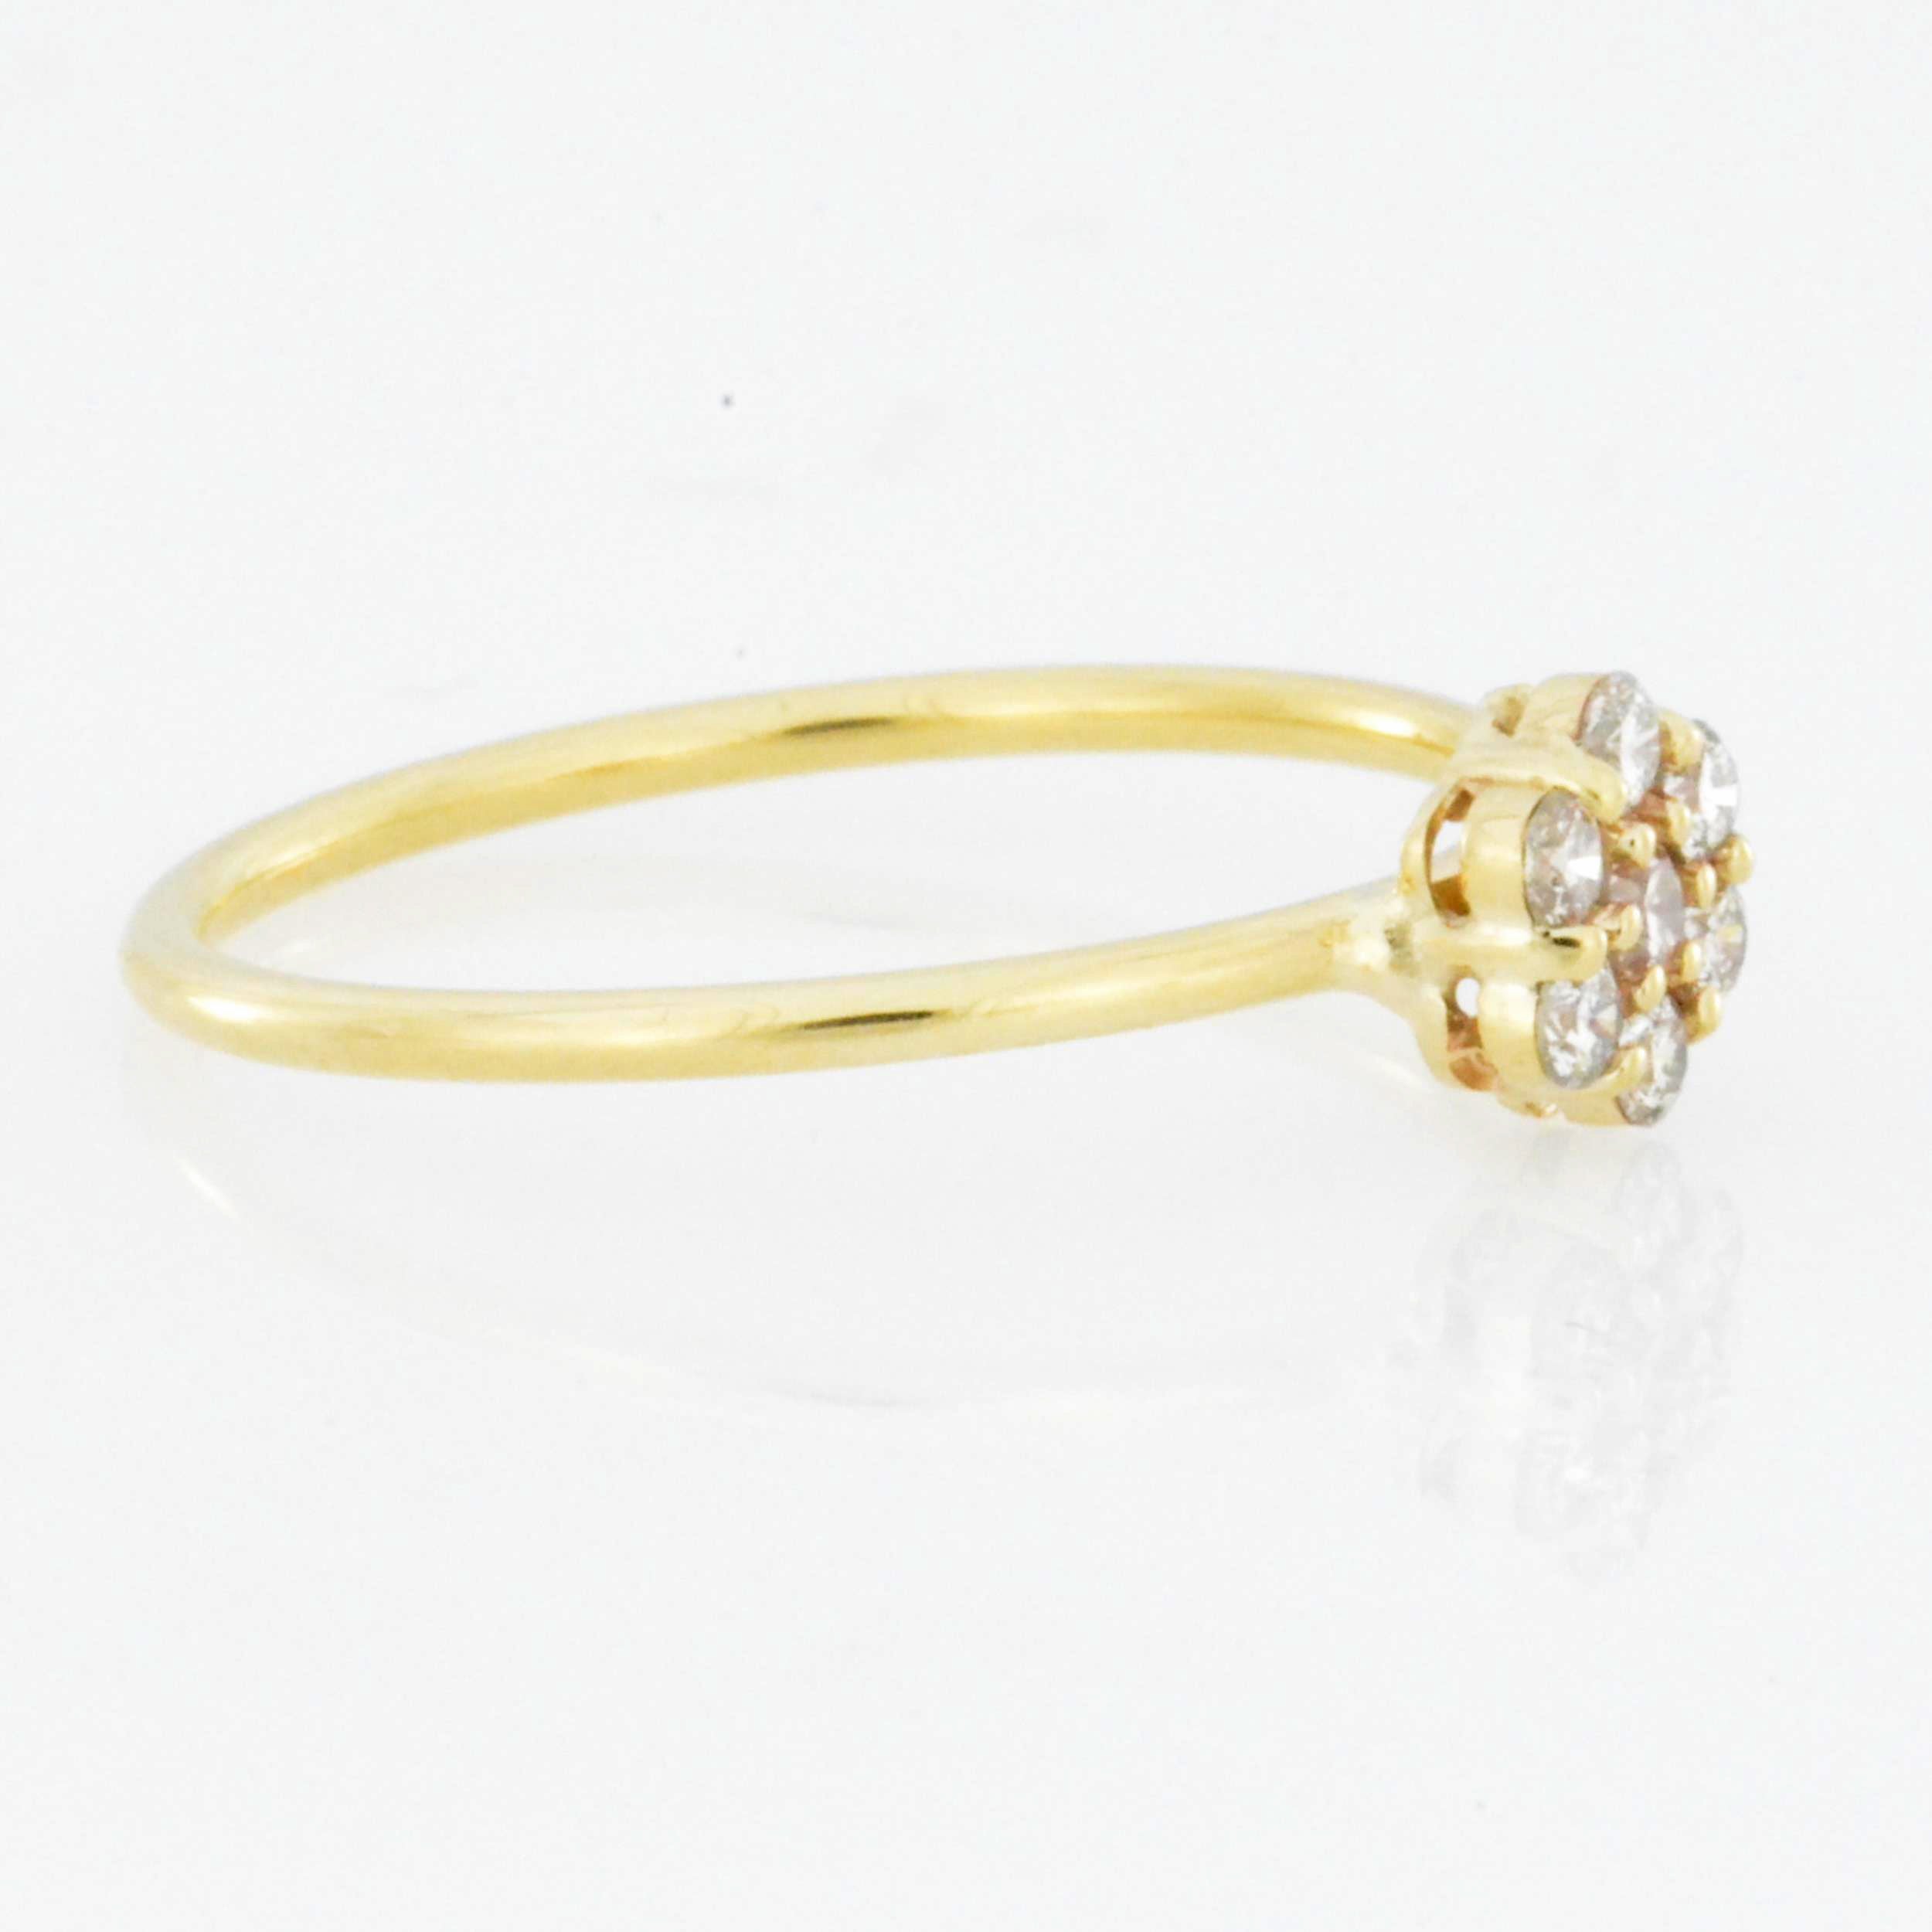 14Kt Gold Genuine Natural Diamond 0.21 Ct Cluster Ring